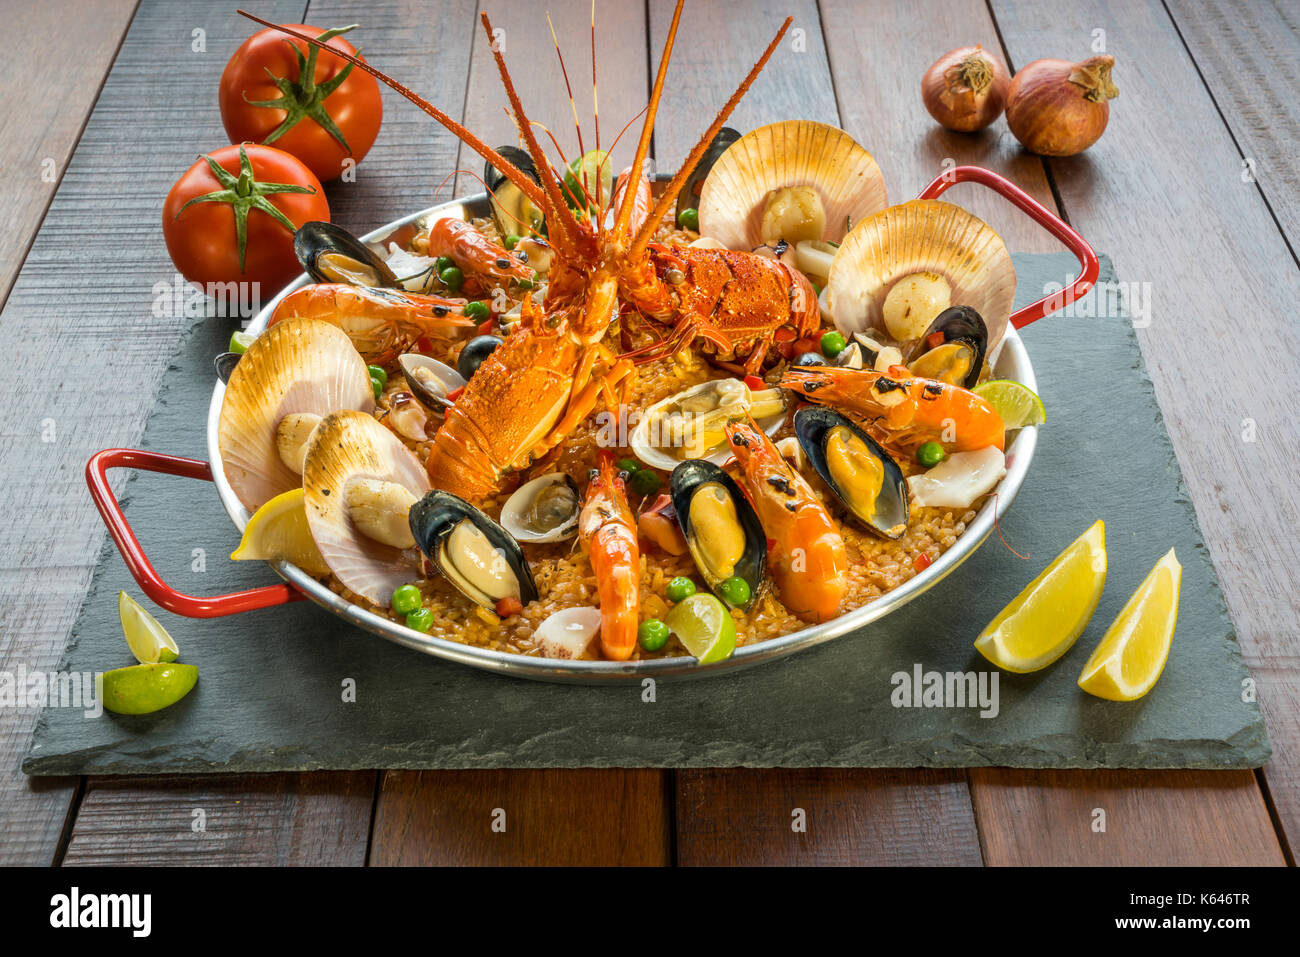 Gourmet seafood Valencia paella with fresh langoustine, clams, mussels and squid on savory saffron rice with prawn, scollops, mussels and lime slices, Stock Photo